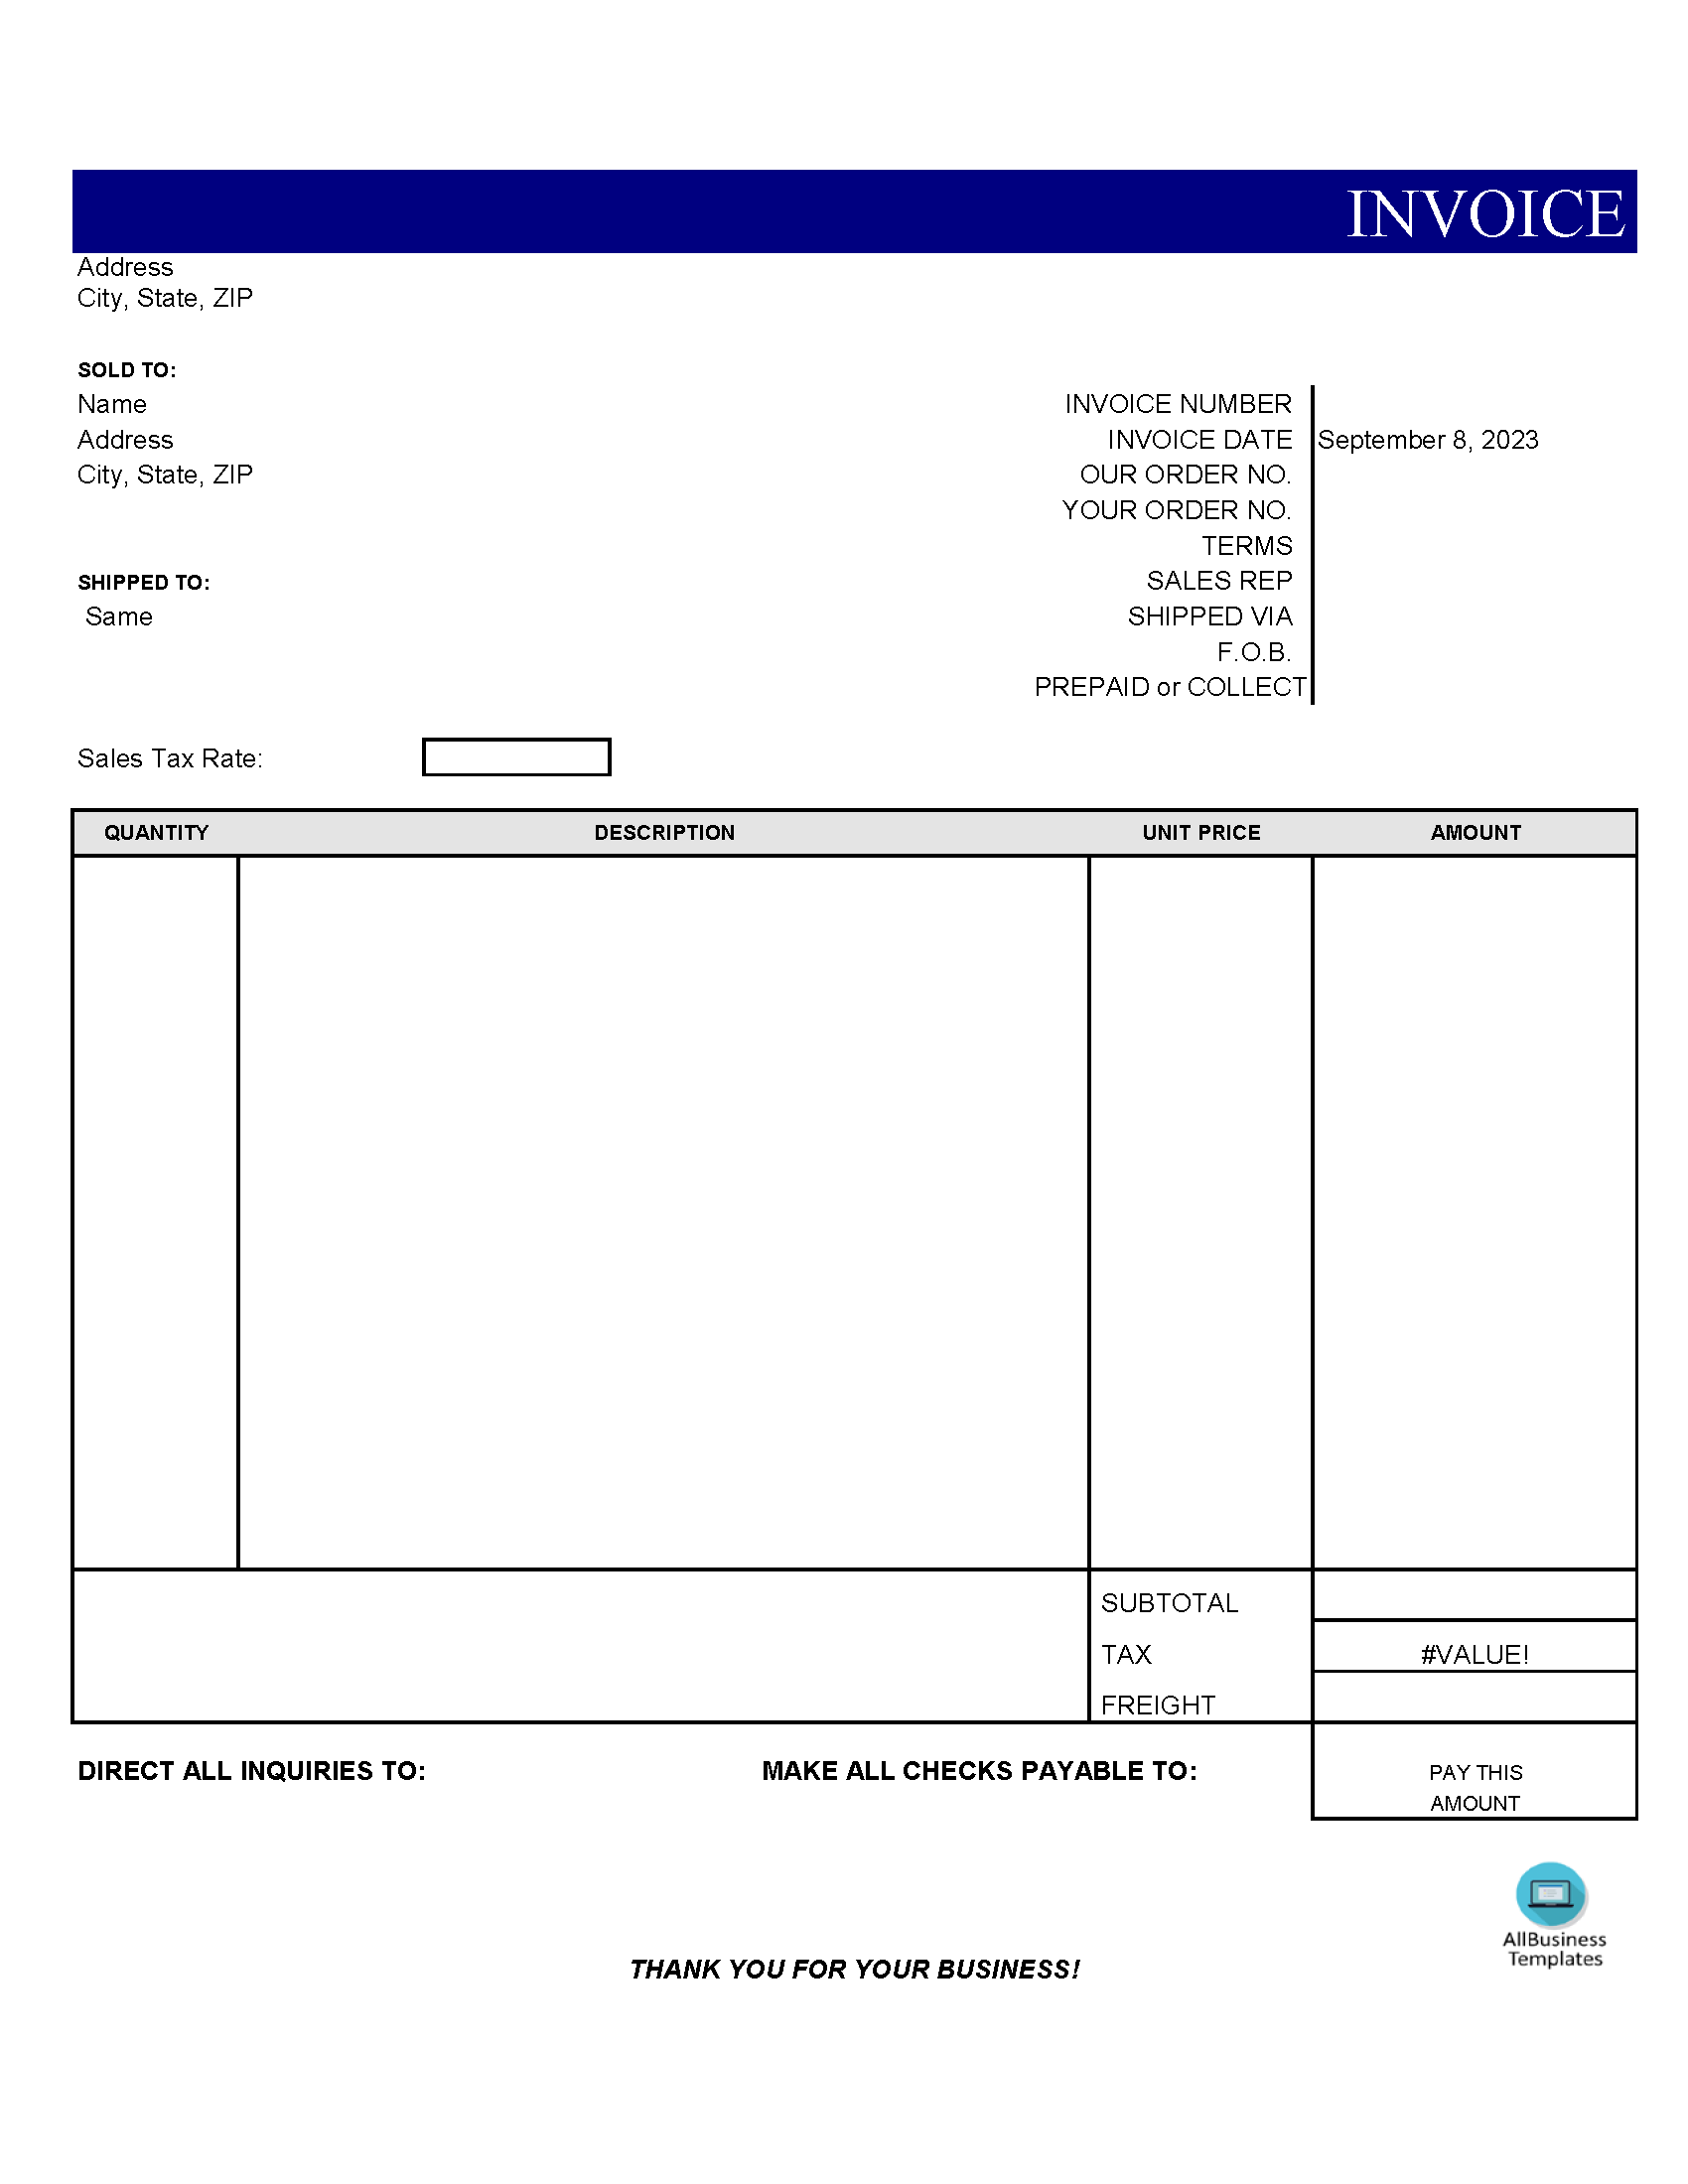 Blank Invoice Excel main image